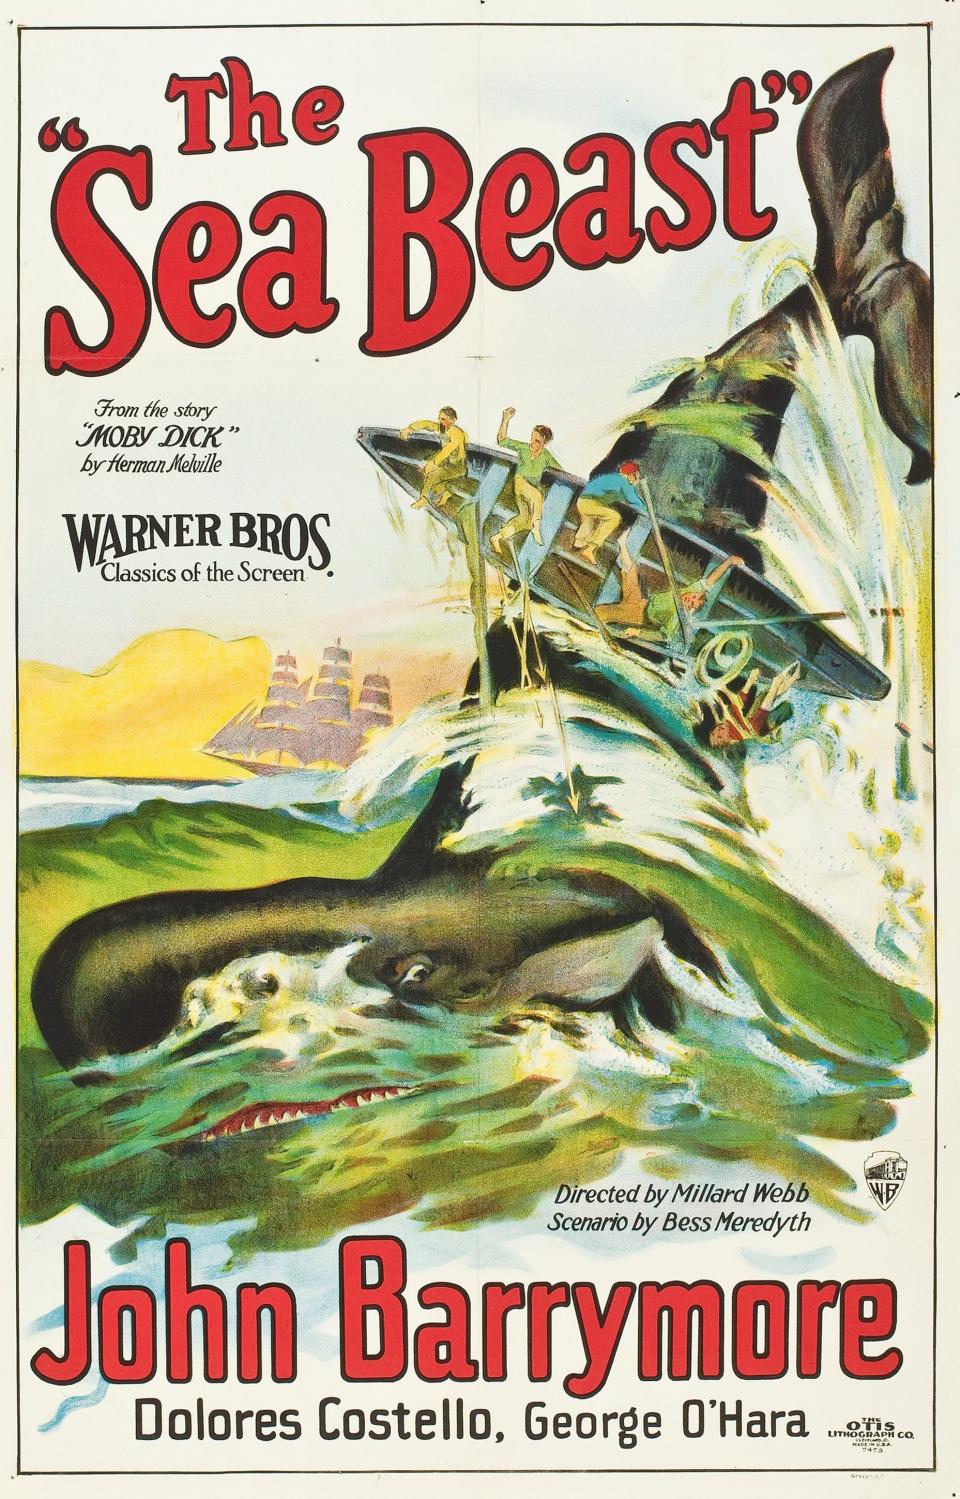 A movie poster for the film "The Sea Beast."